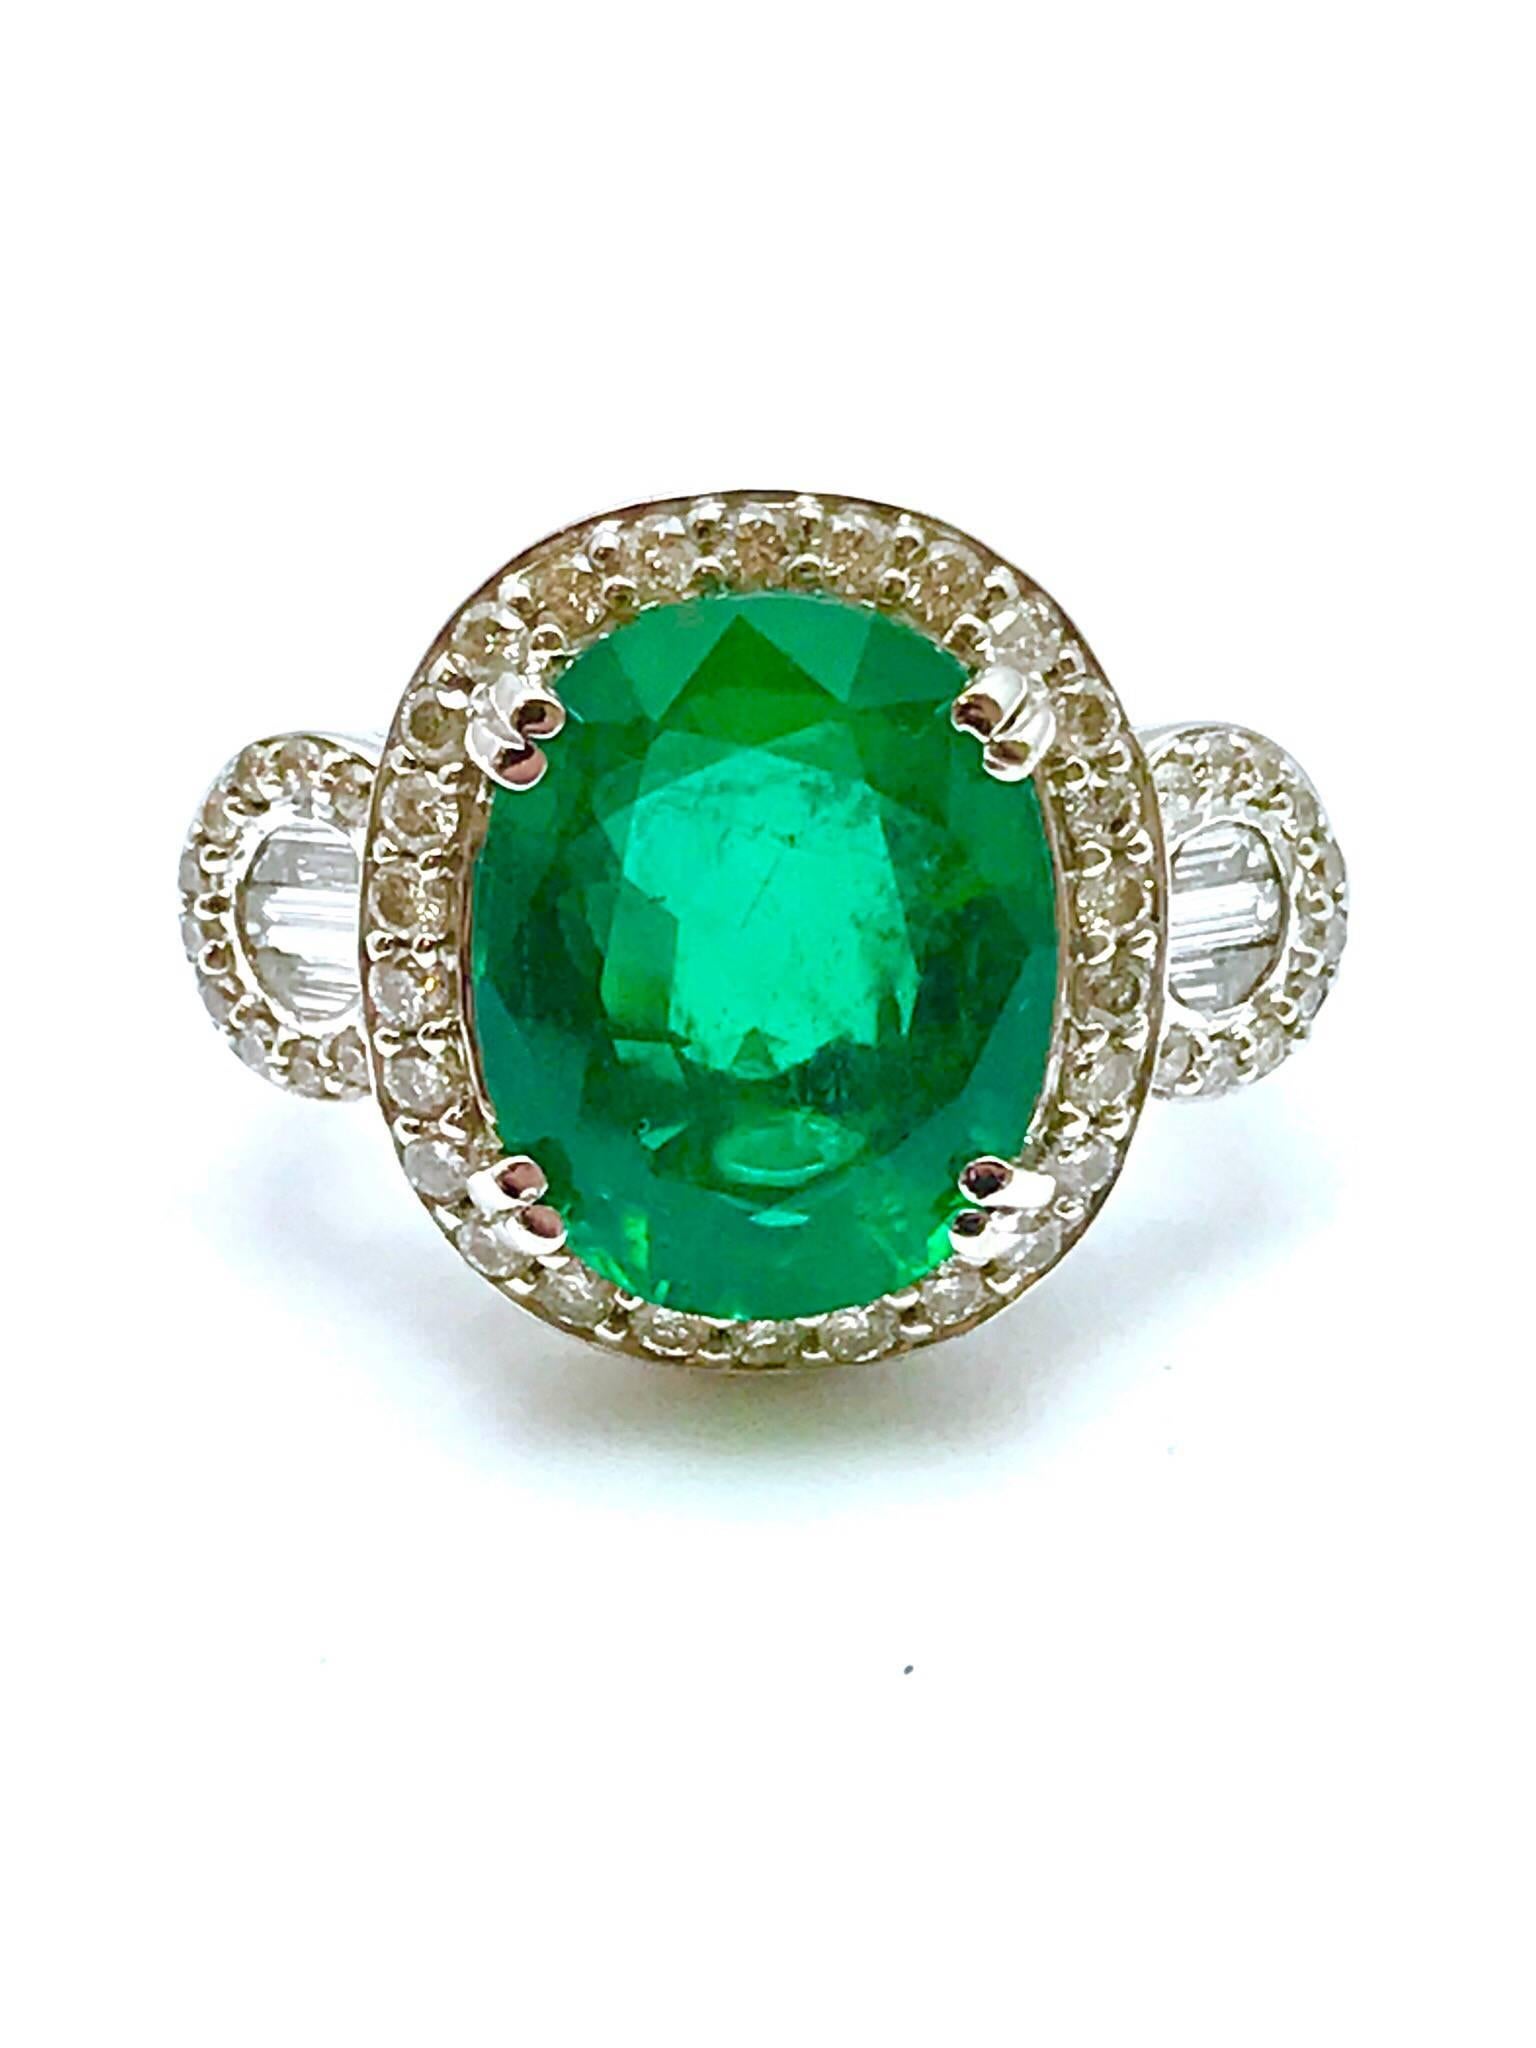 A 5.01 carat oval natural emerald and diamond 18 karat white gold cocktail ring.  The emerald is set with four double prongs, framed by a single row of round brilliant cut diamonds, leading into a diamond half shank.  There are 60 diamonds, with a